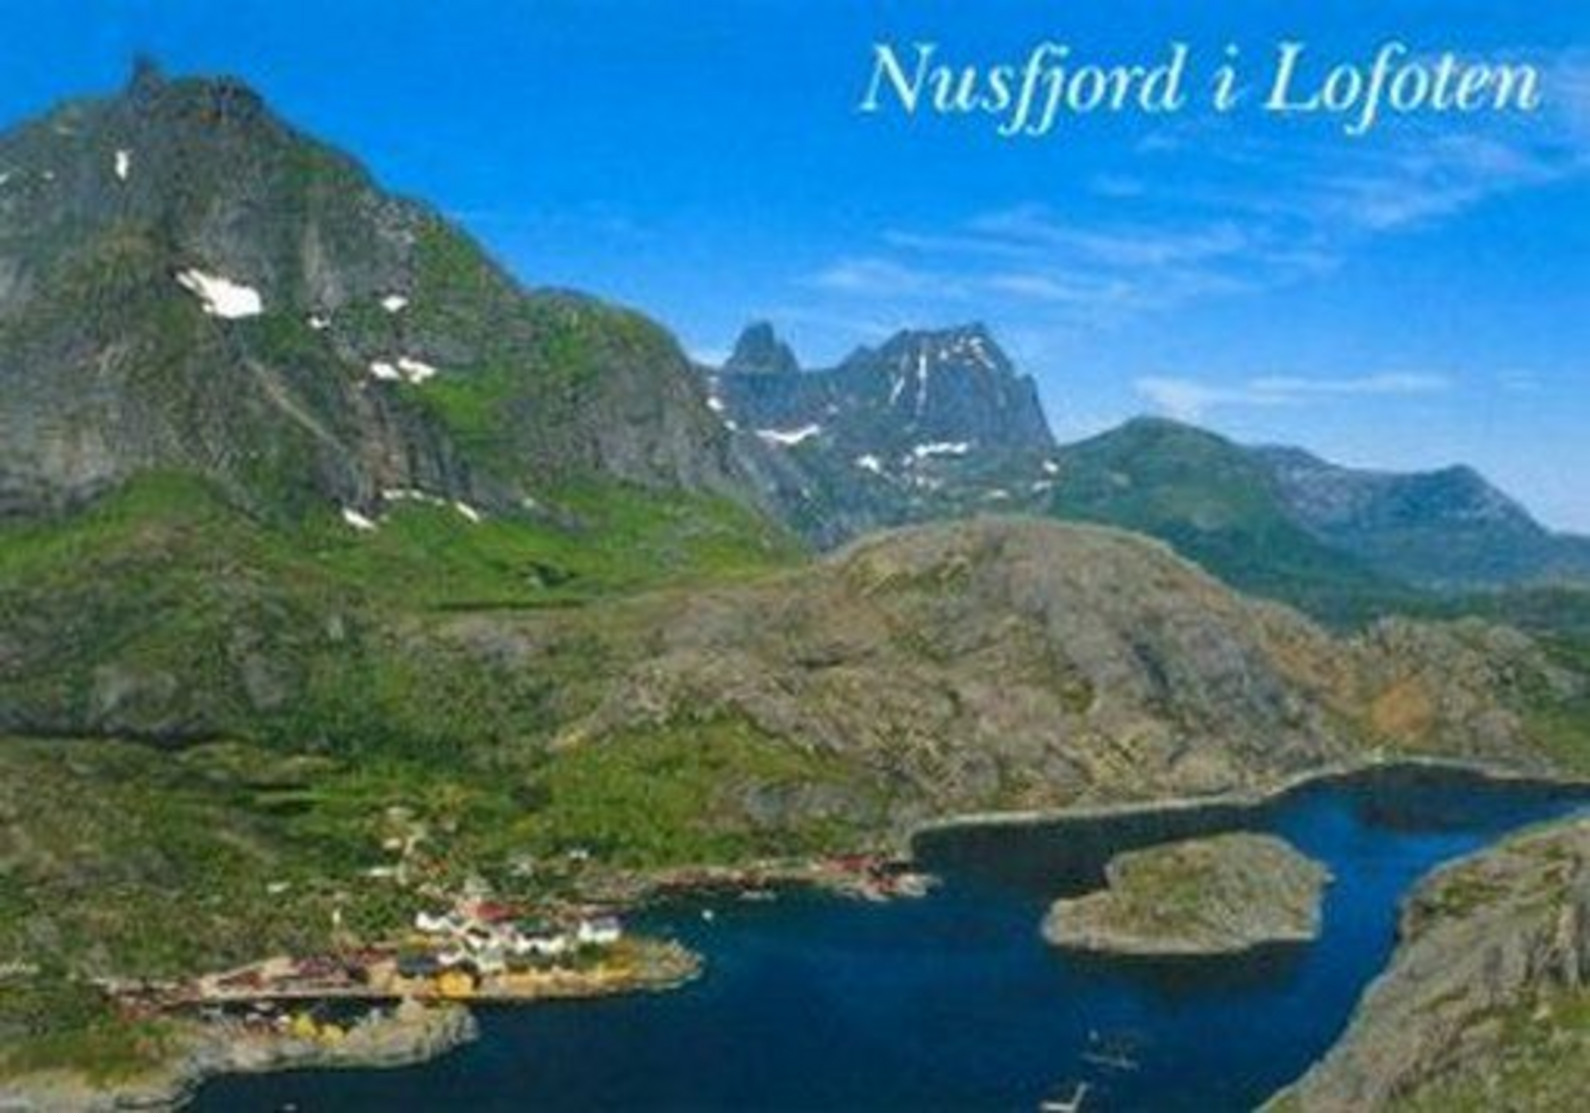 Lot collection 87x Norway Oslo Norge Lofoten Islands